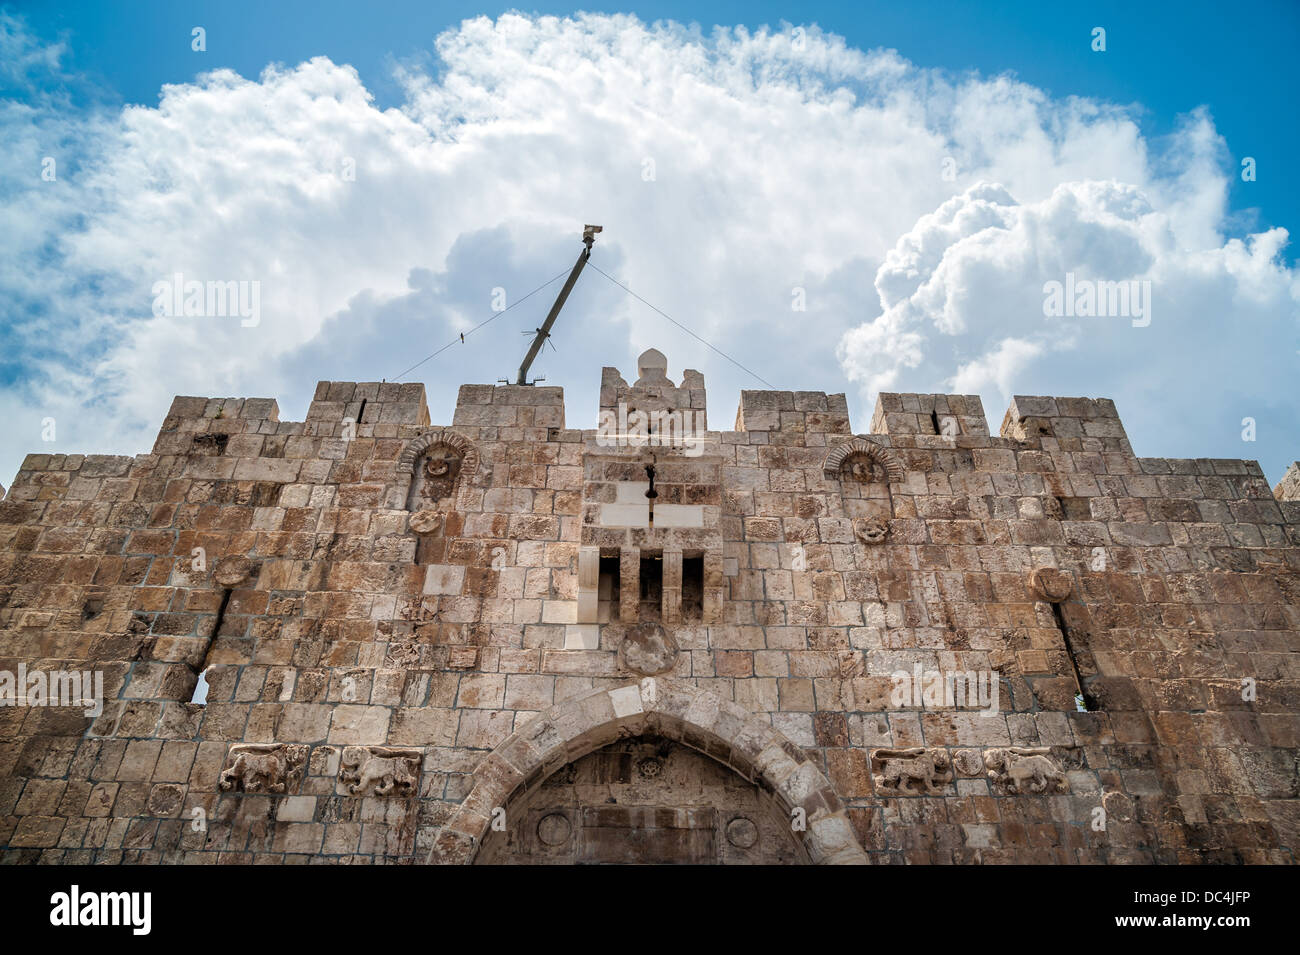 Lion Gate of the ancient wall surrounding the Old City of Jerusalem Stock Photo